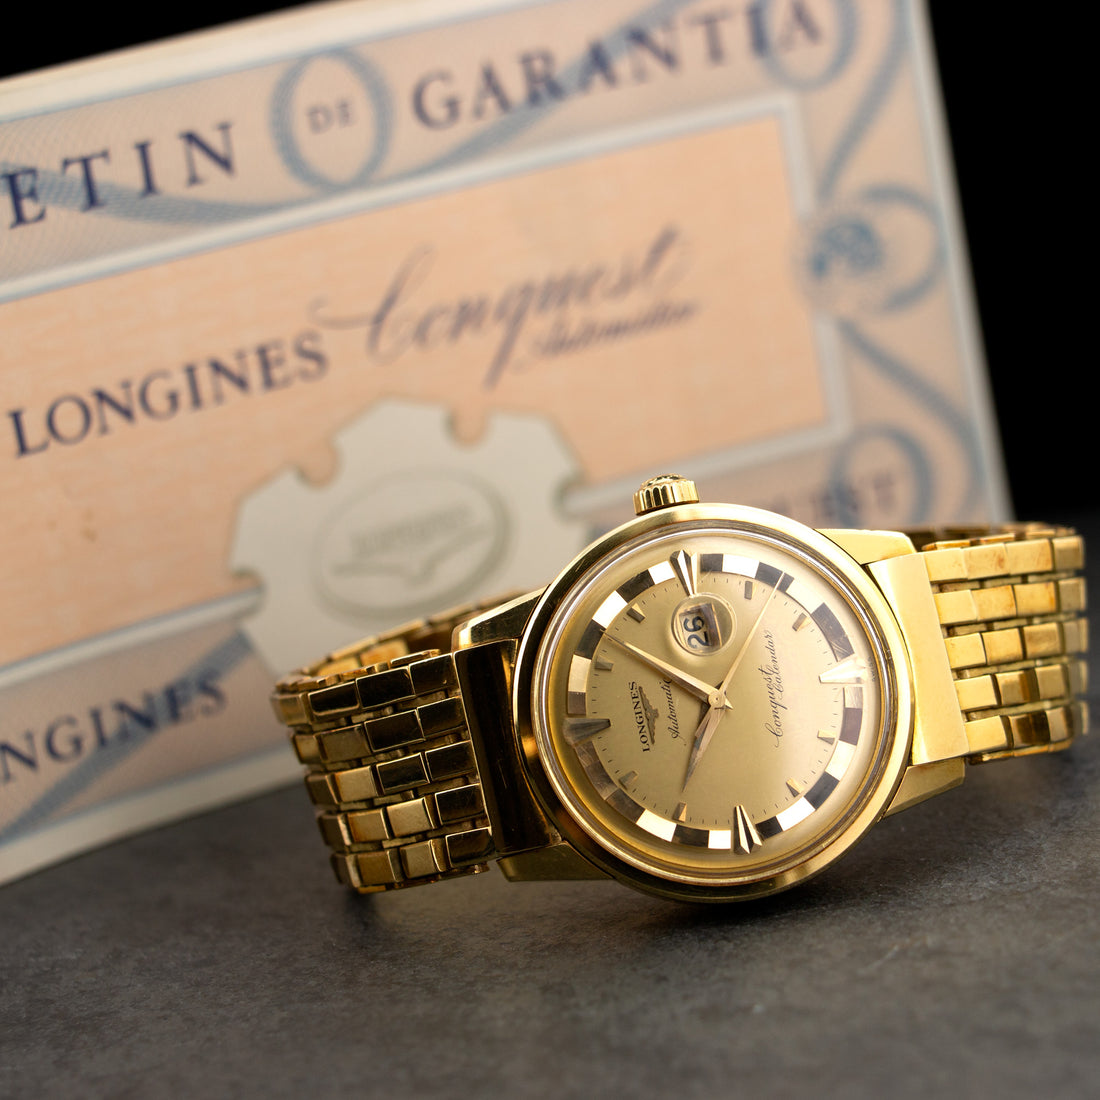 Longines Yellow Gold Conquest Calendar Watch Ref. 9005 with Original Papers from Cuba